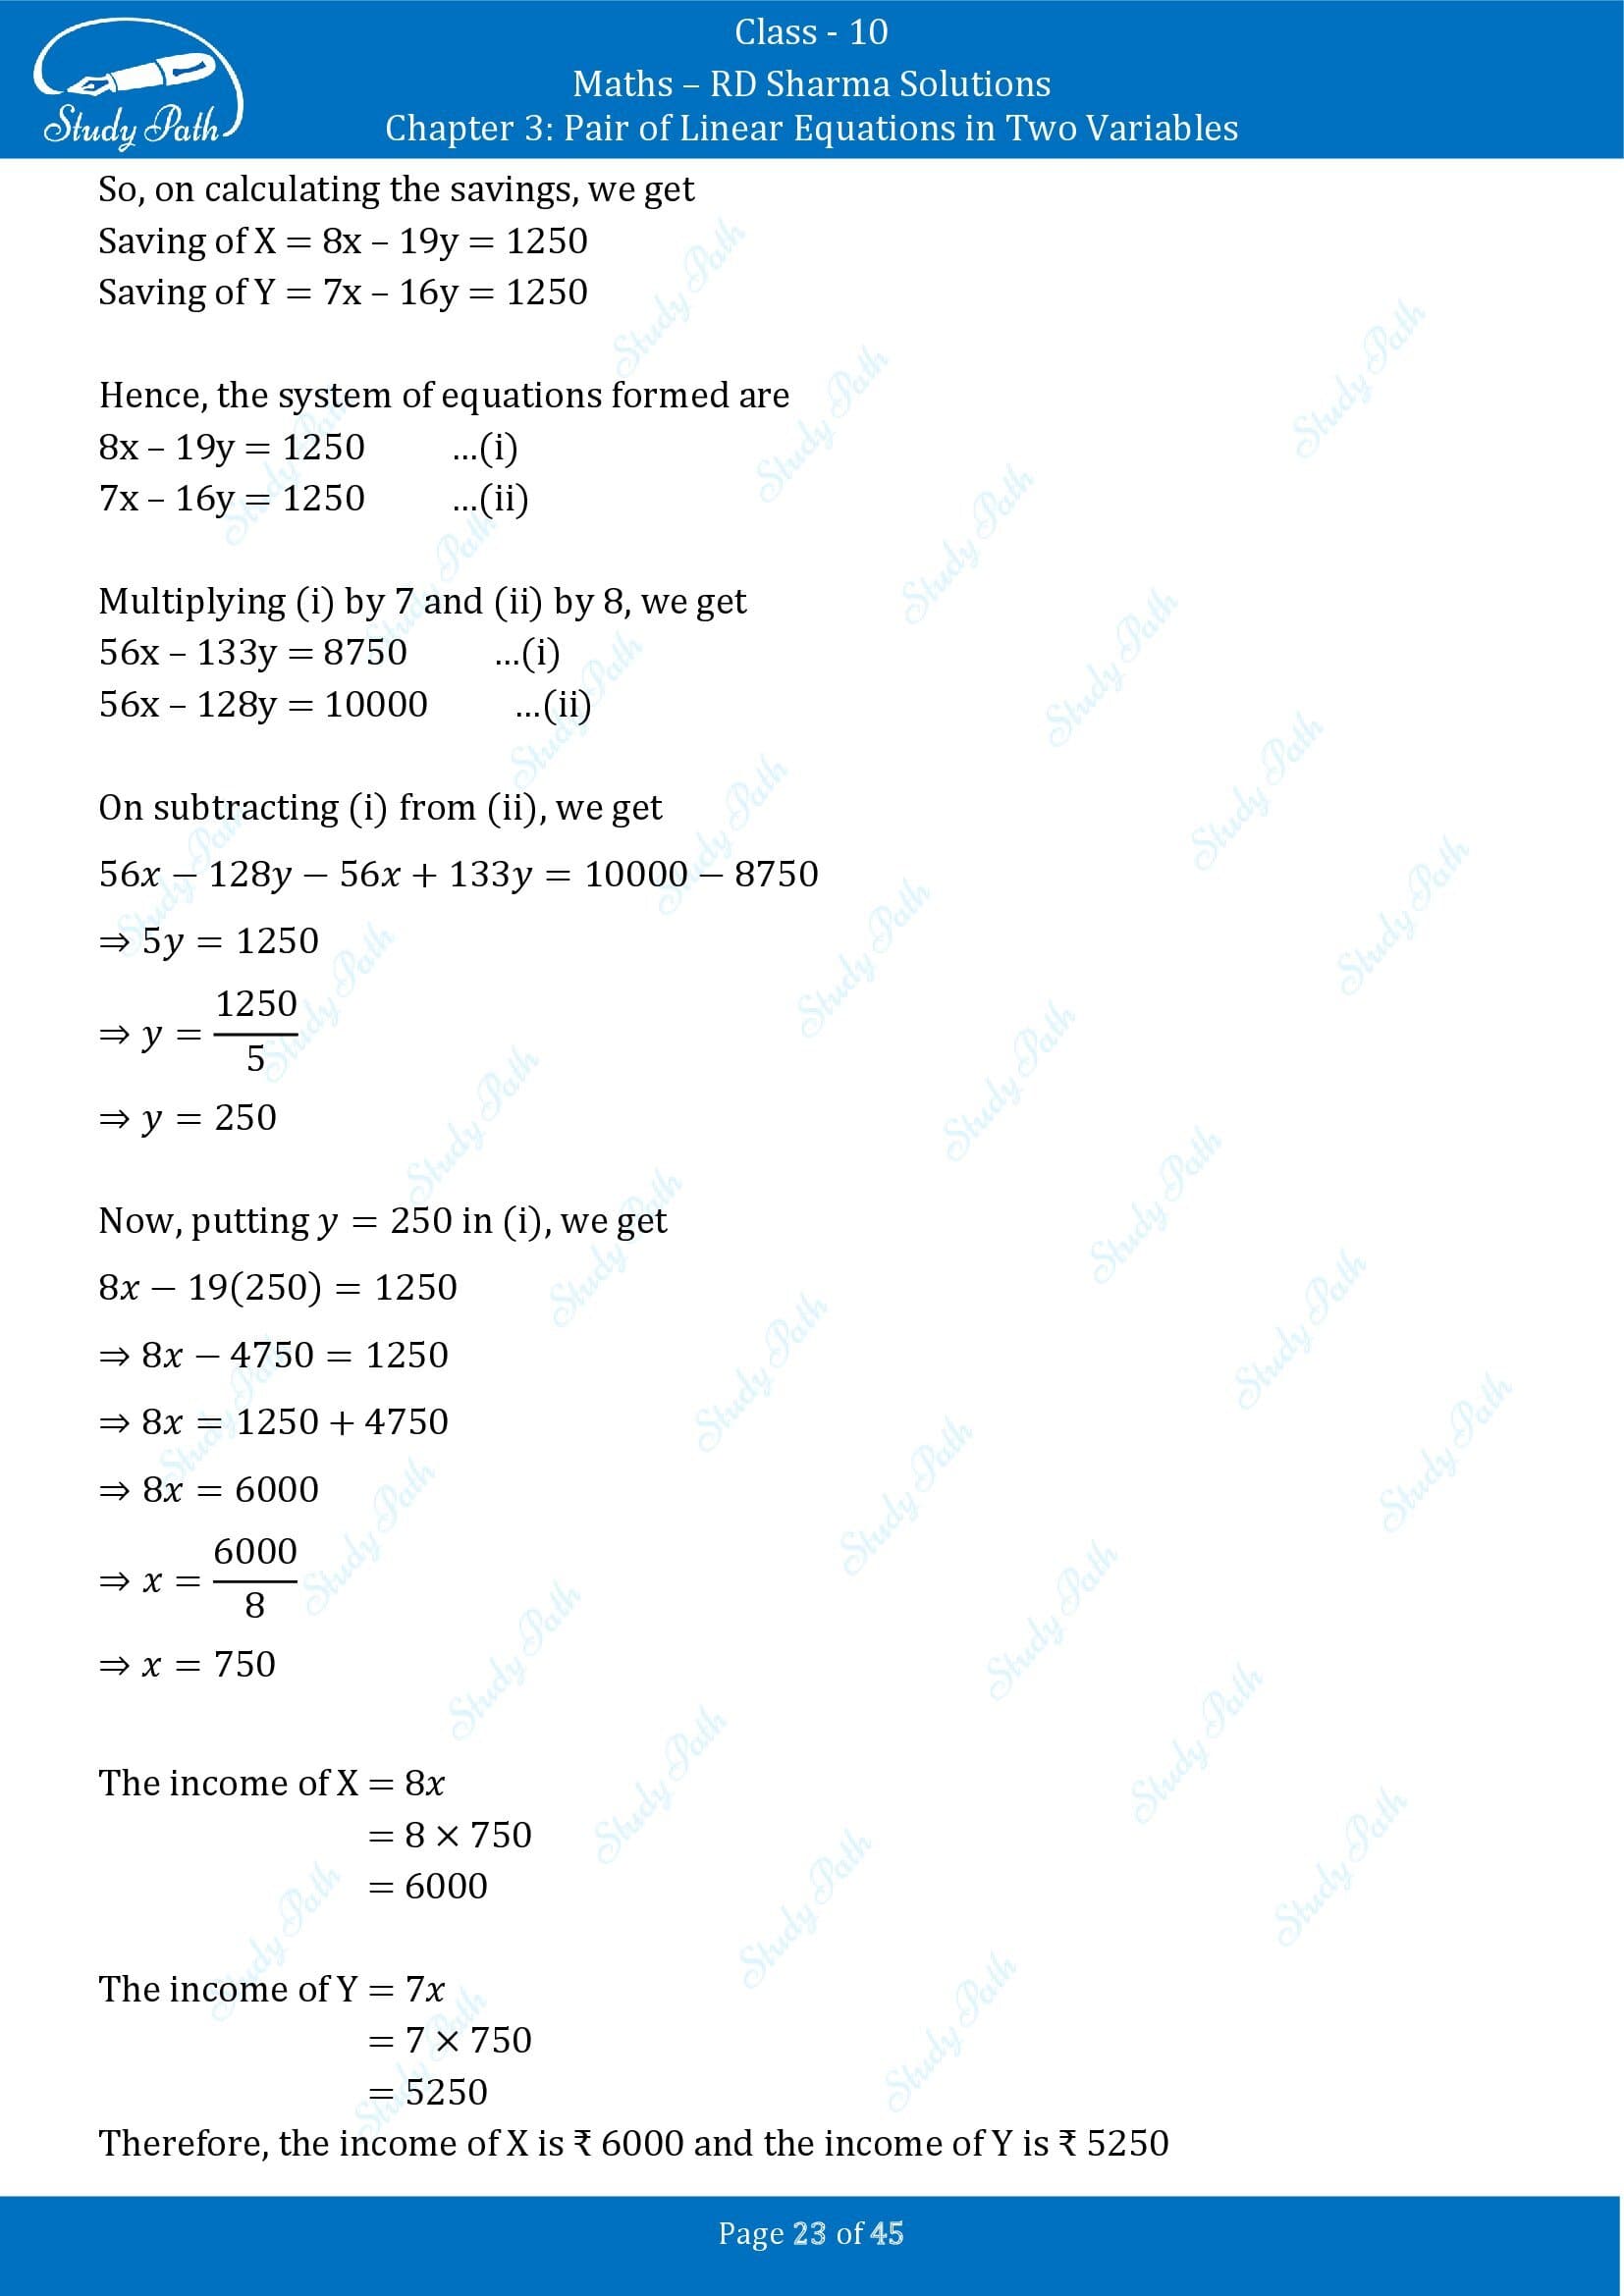 RD Sharma Solutions Class 10 Chapter 3 Pair of Linear Equations in Two Variables Exercise 3.11 00023